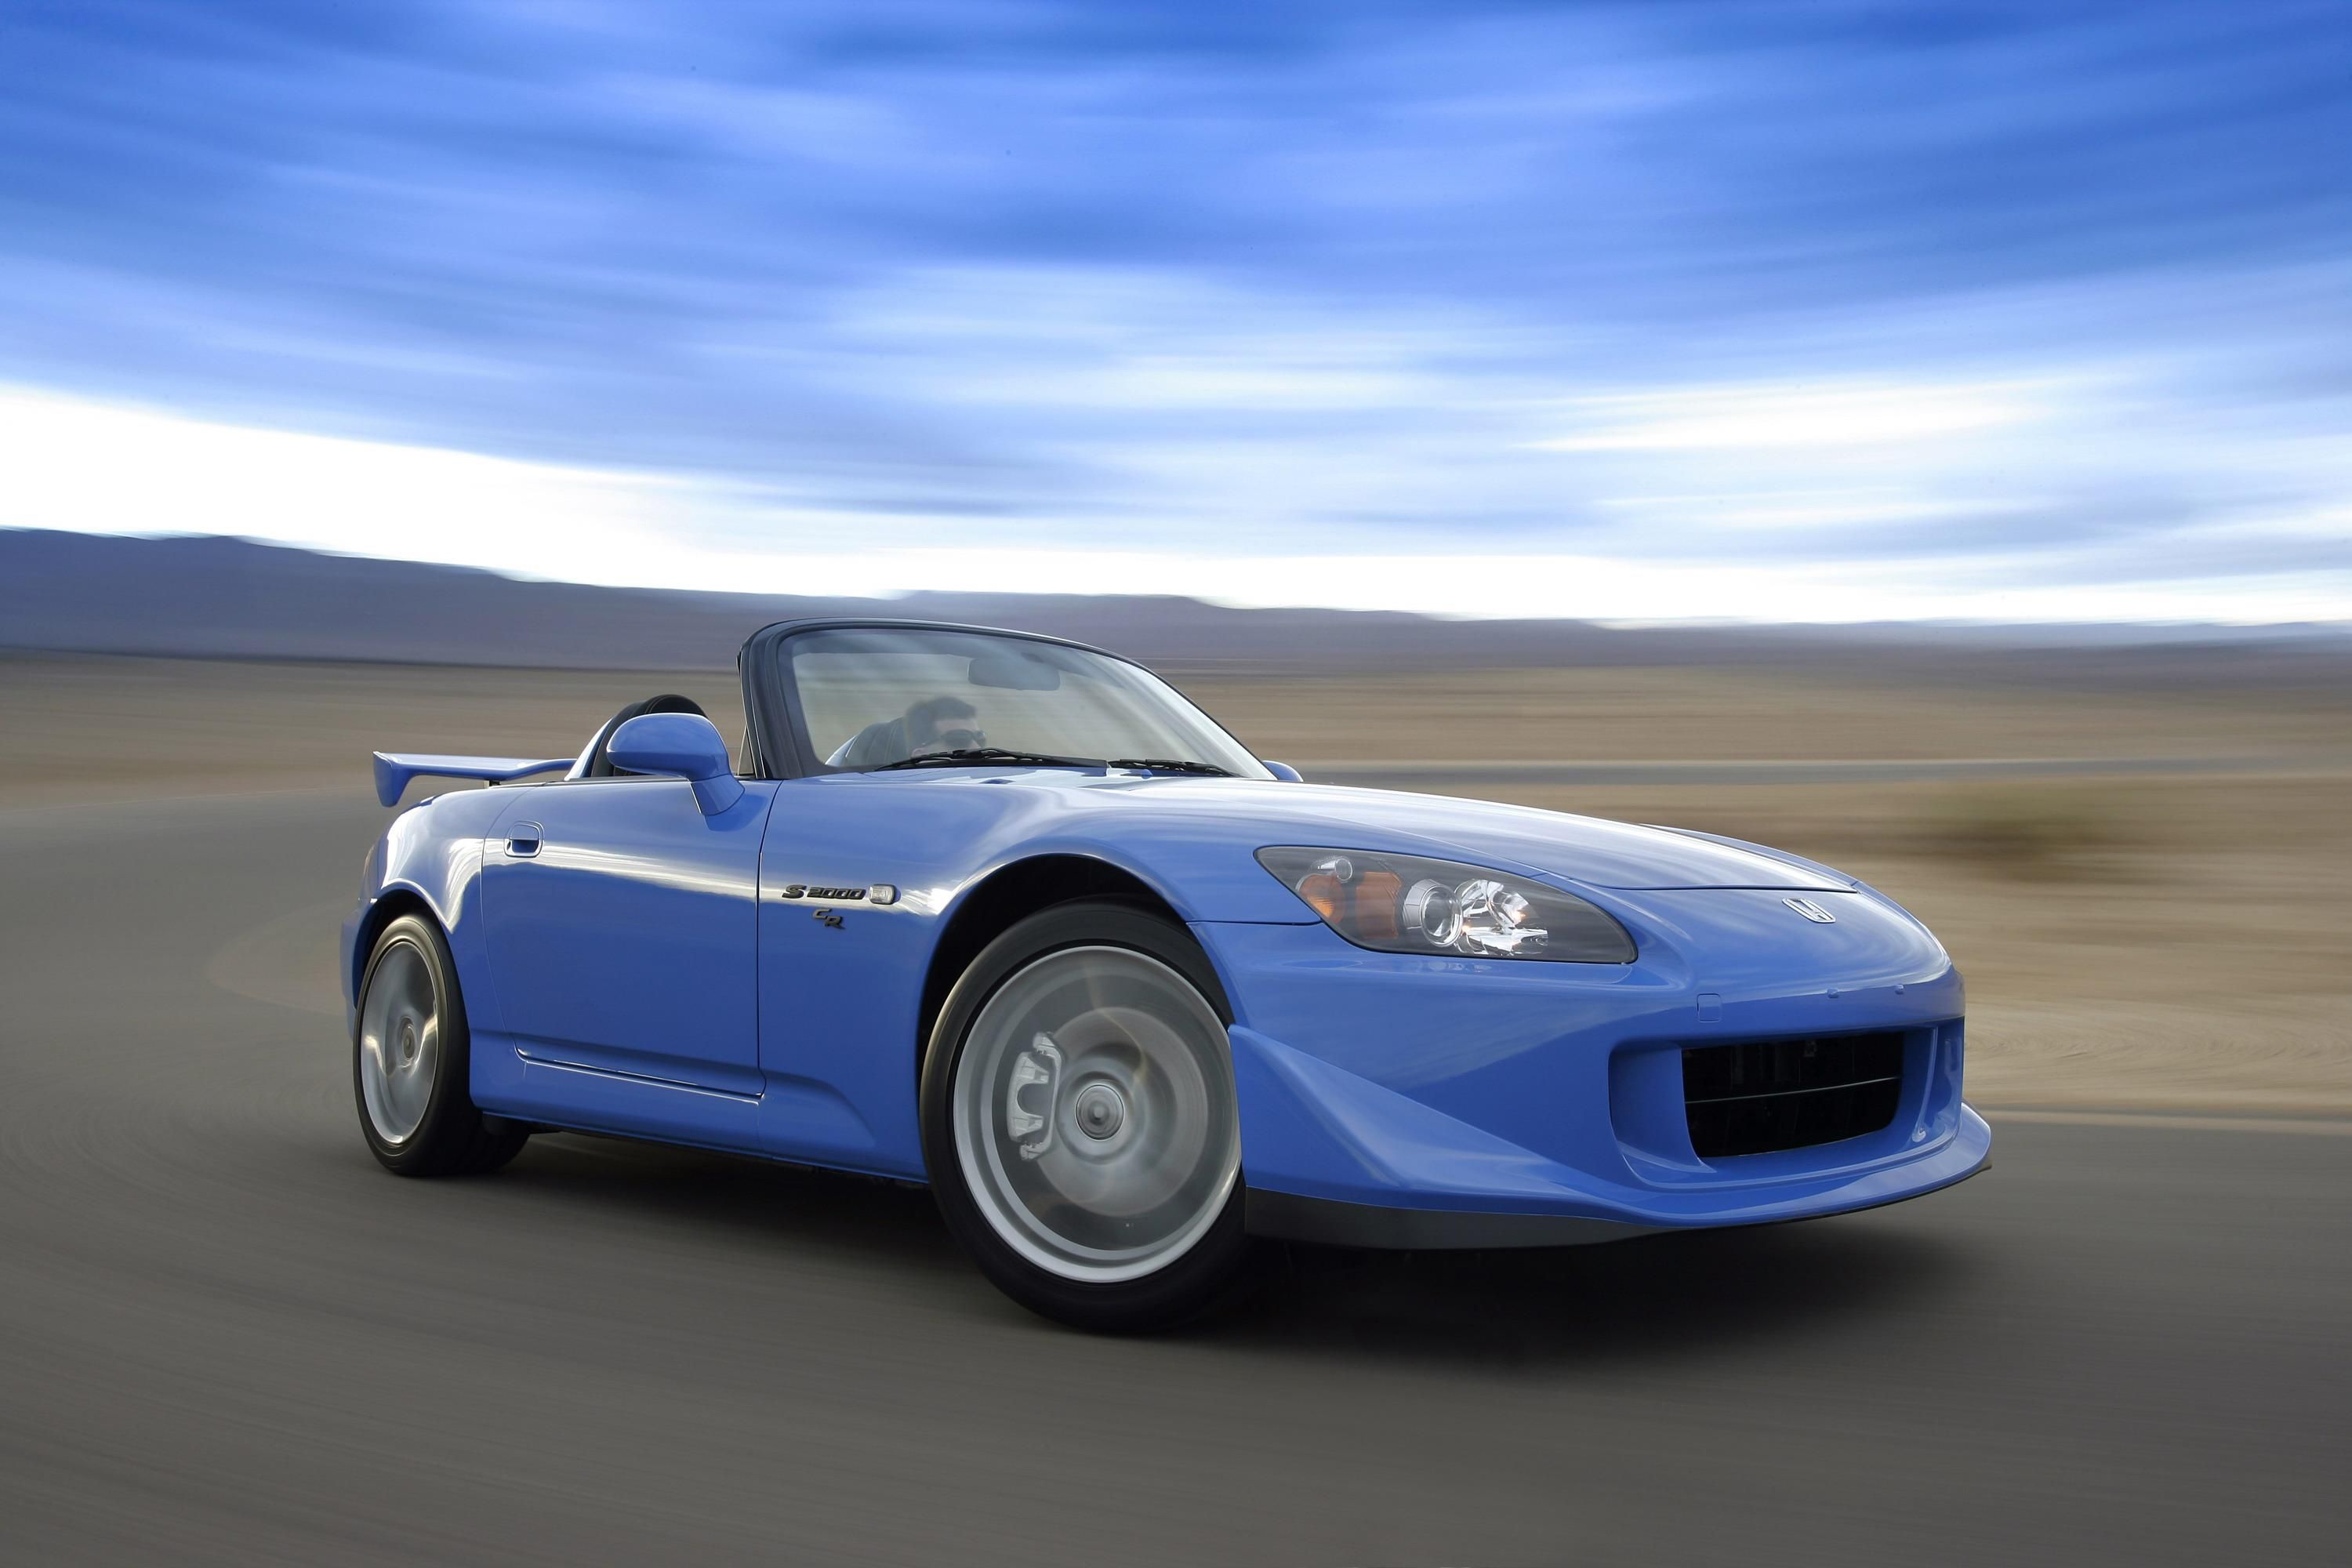 2009 Shed a tear - there will be no S2000 after 2009